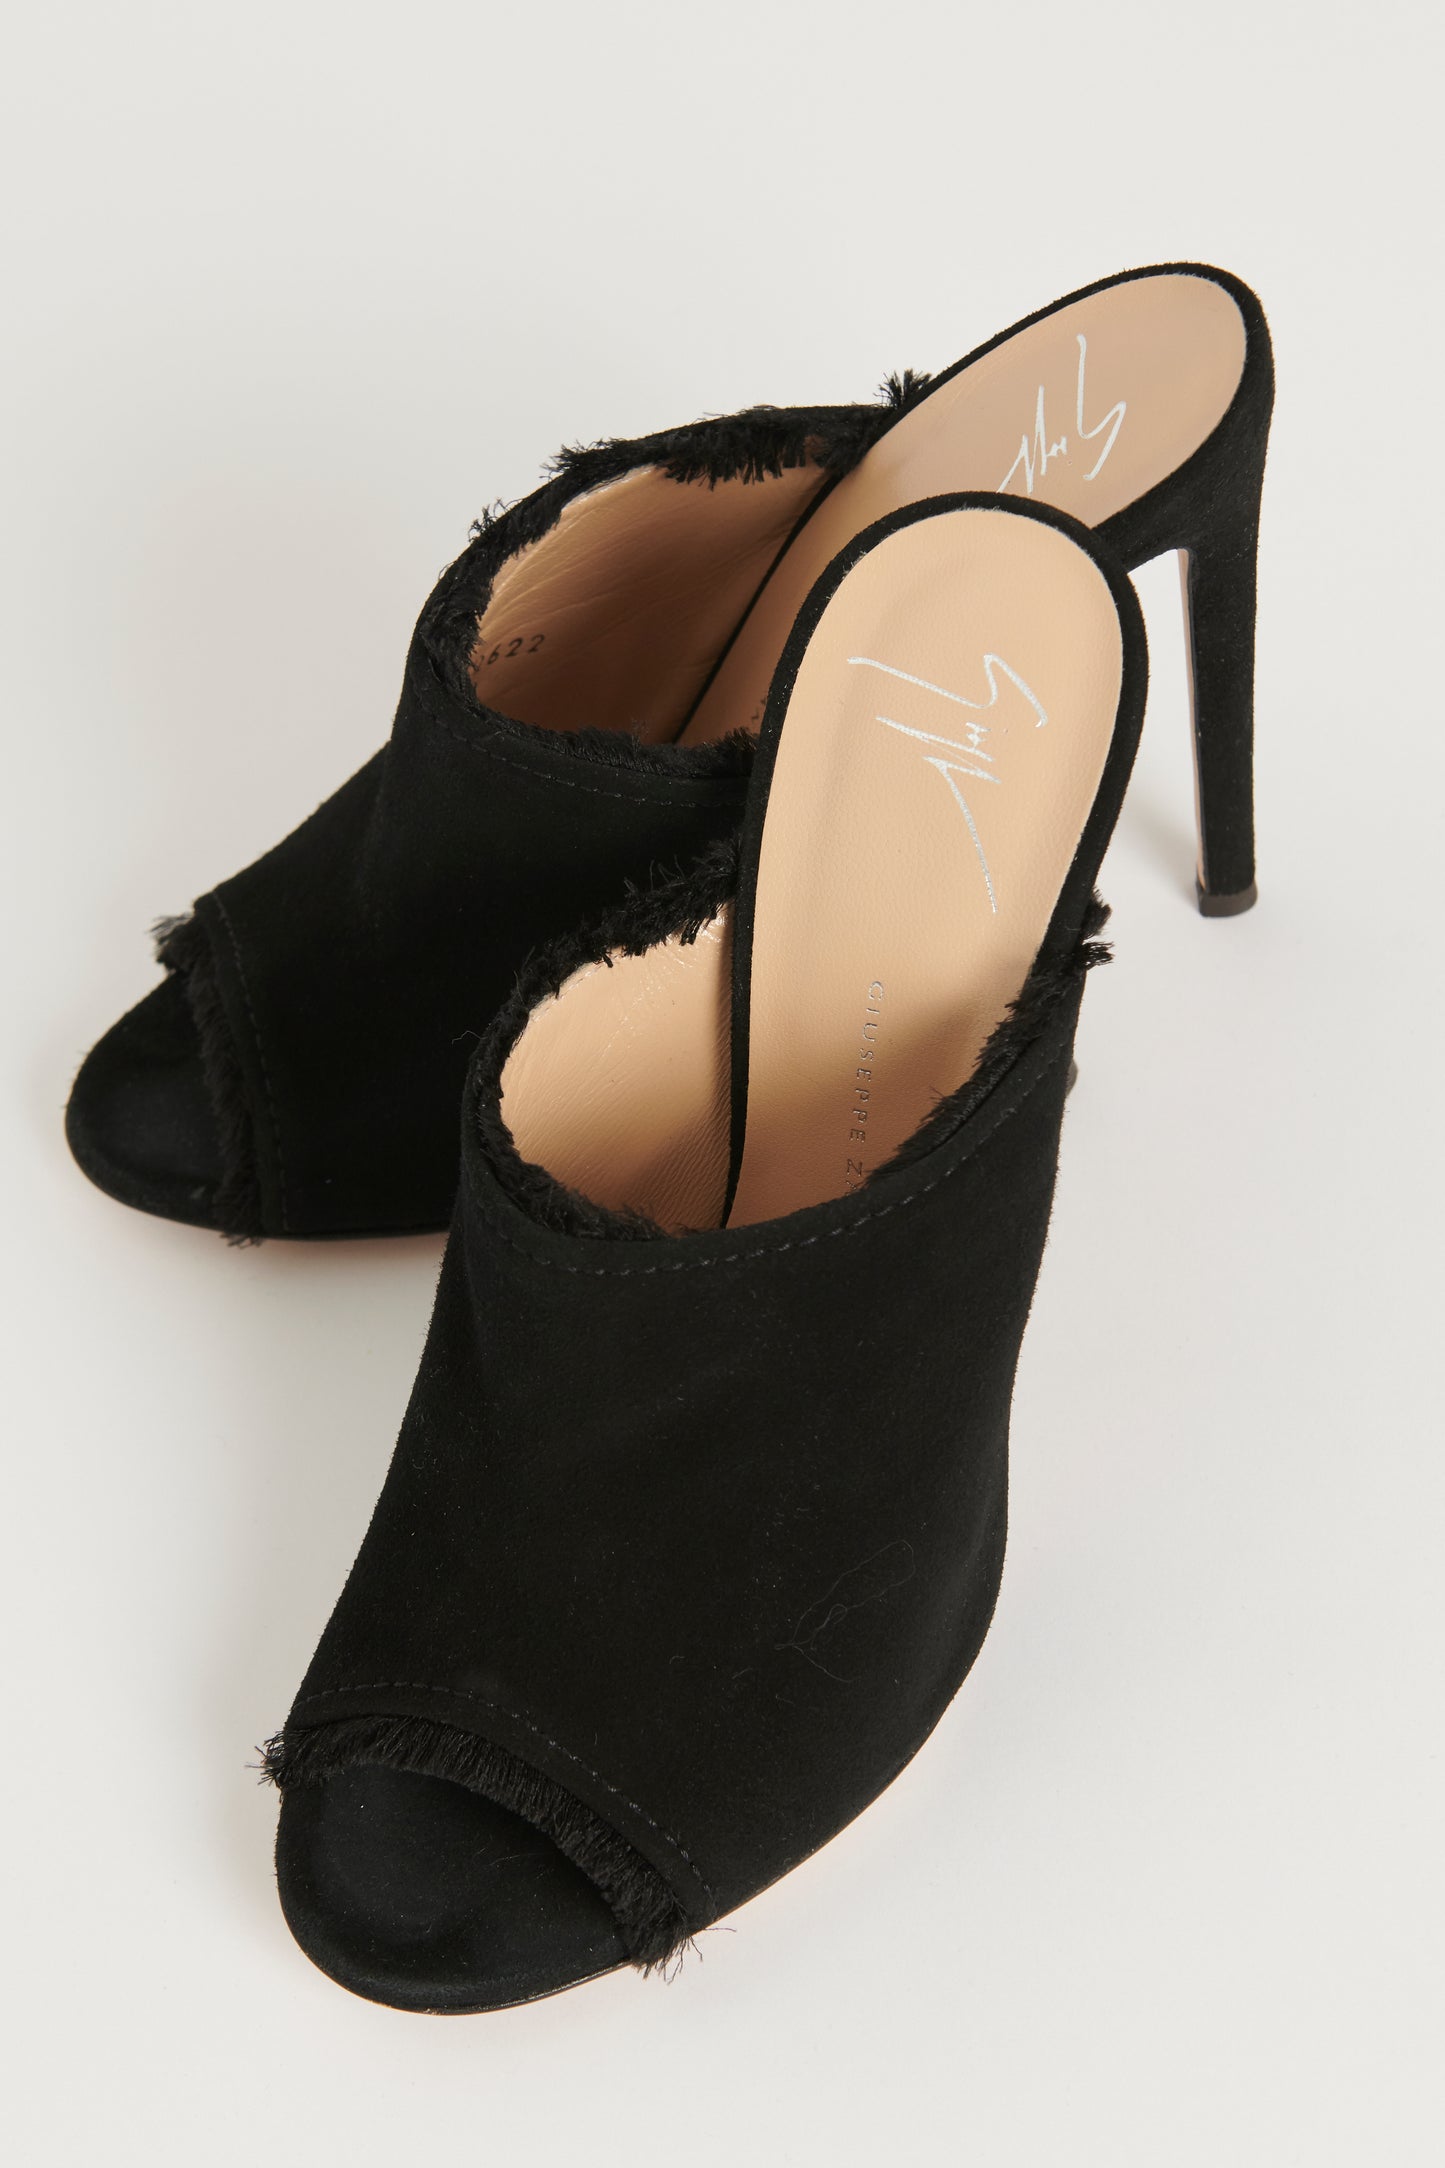 Black Suede Heeled Preowned Mules with Fringe Trim